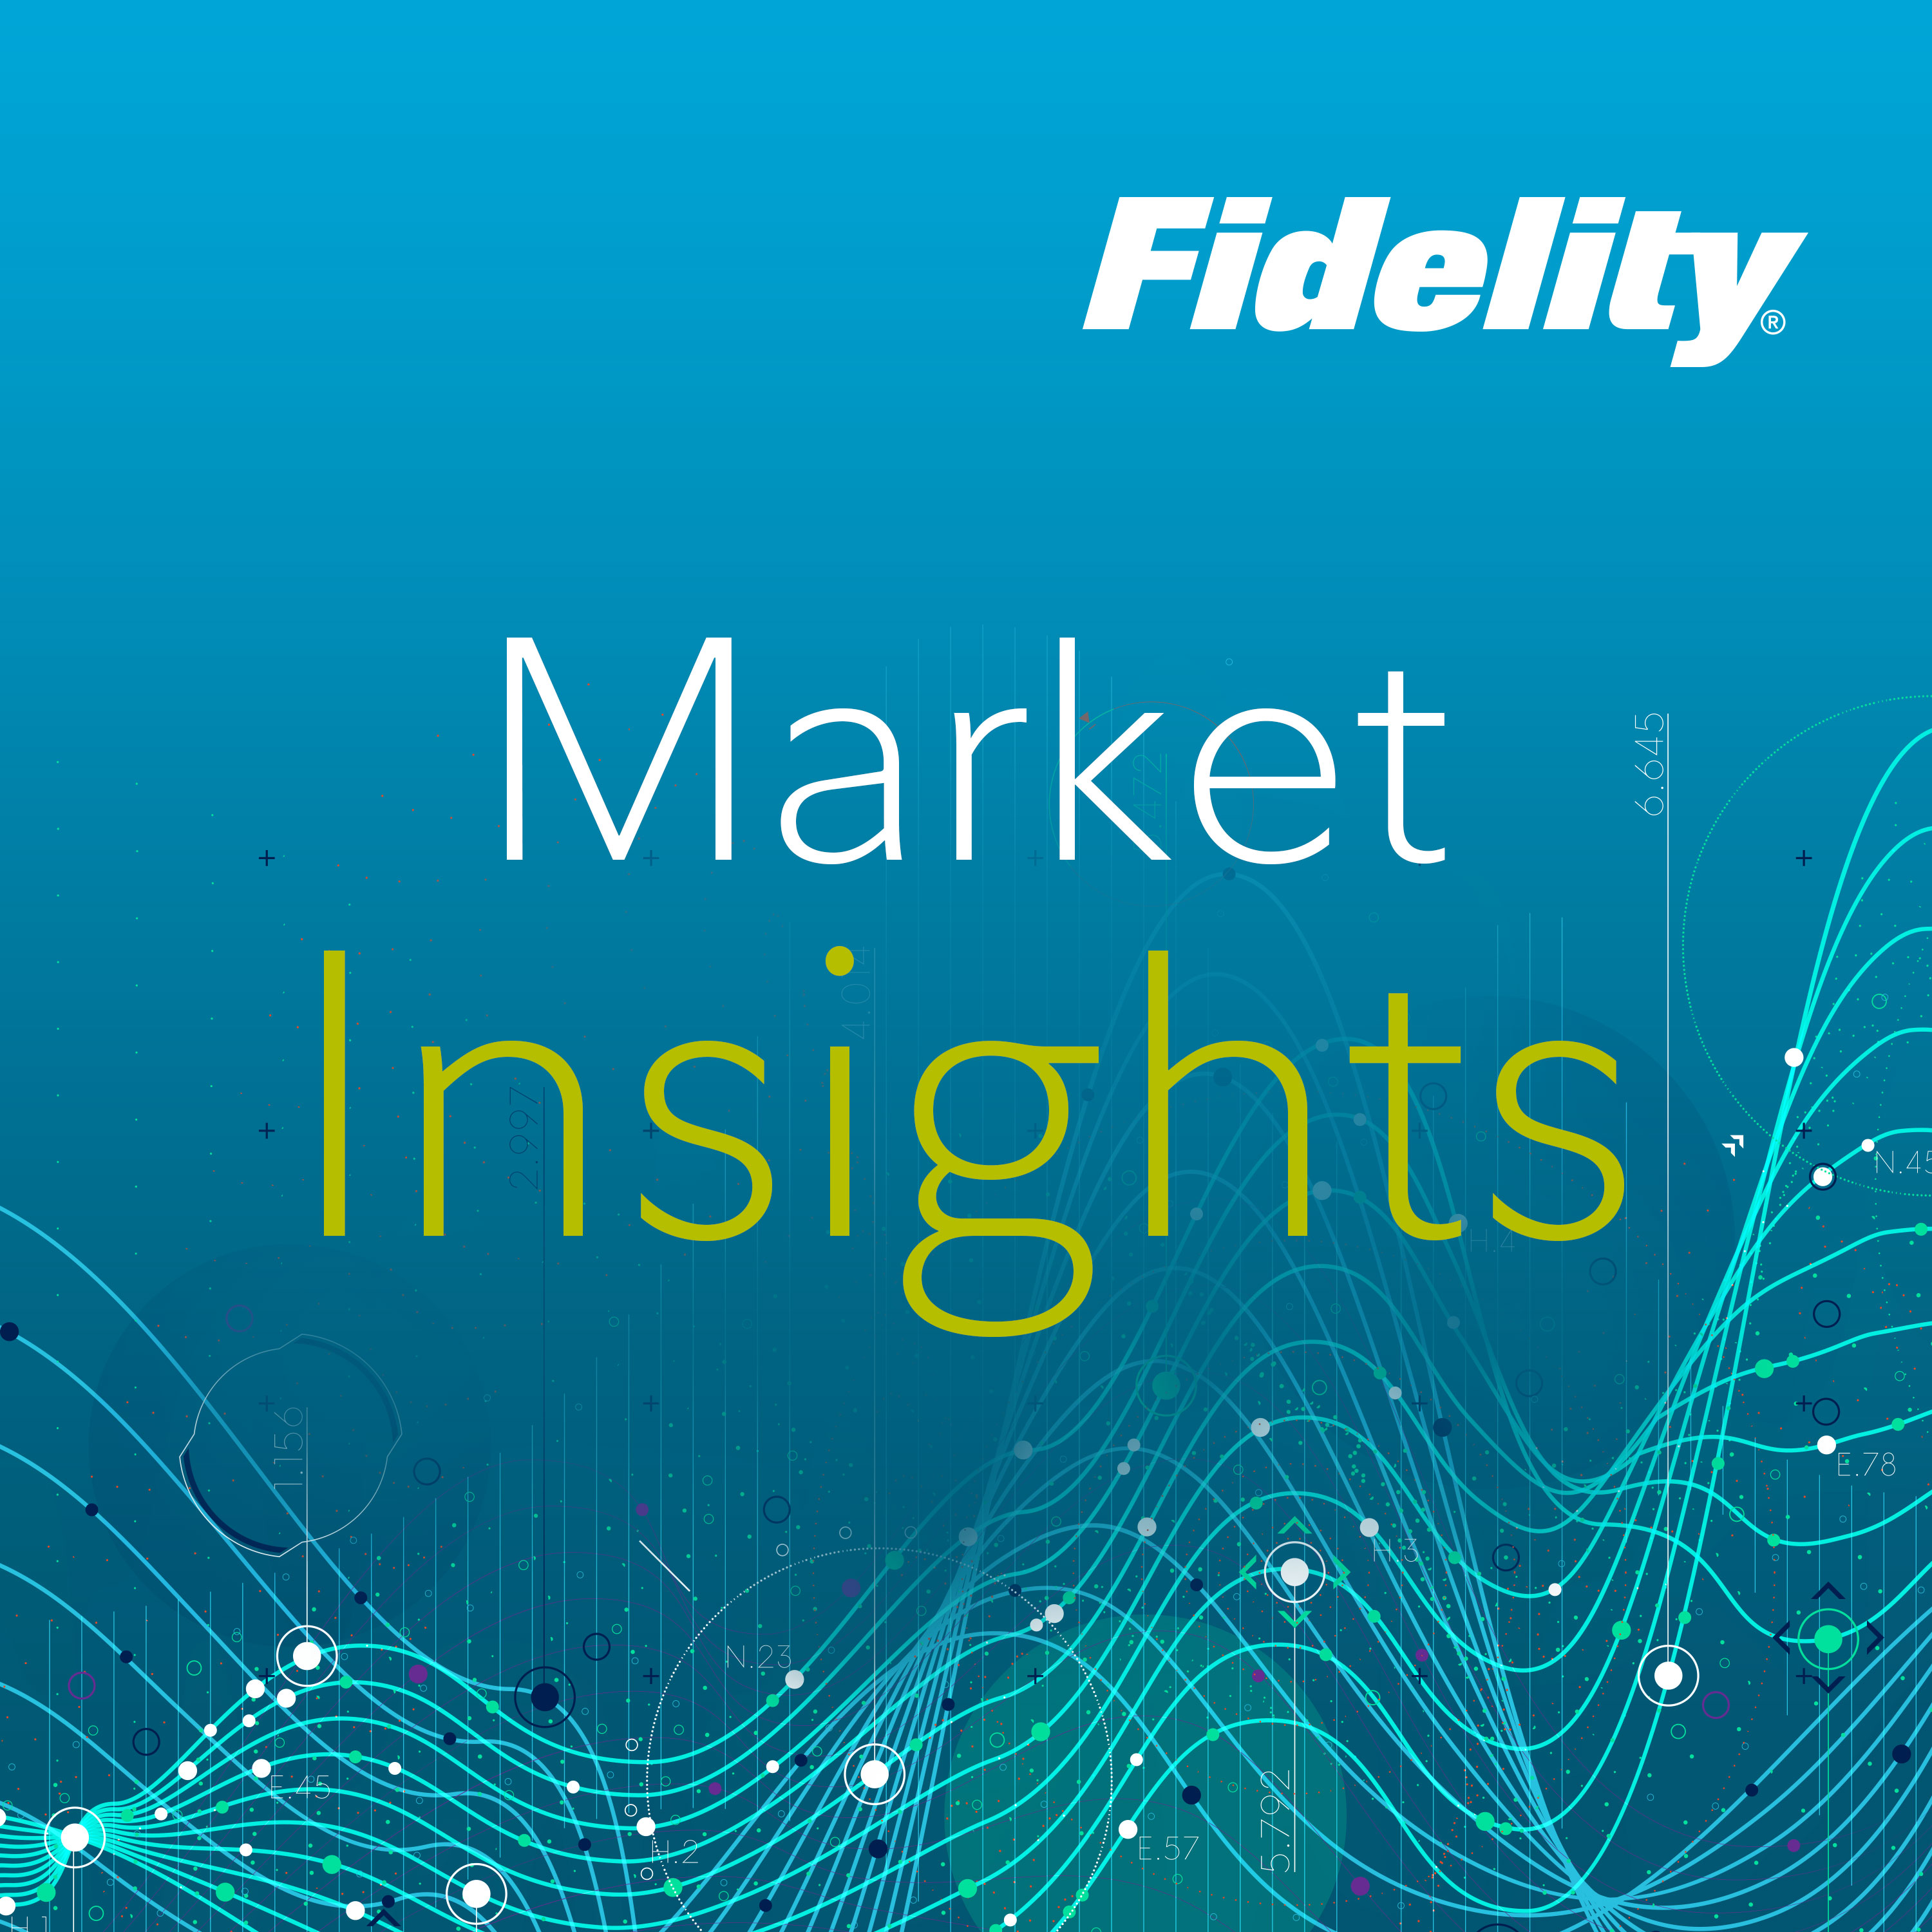 Market Insights: Equity market backdrop and quant strategies